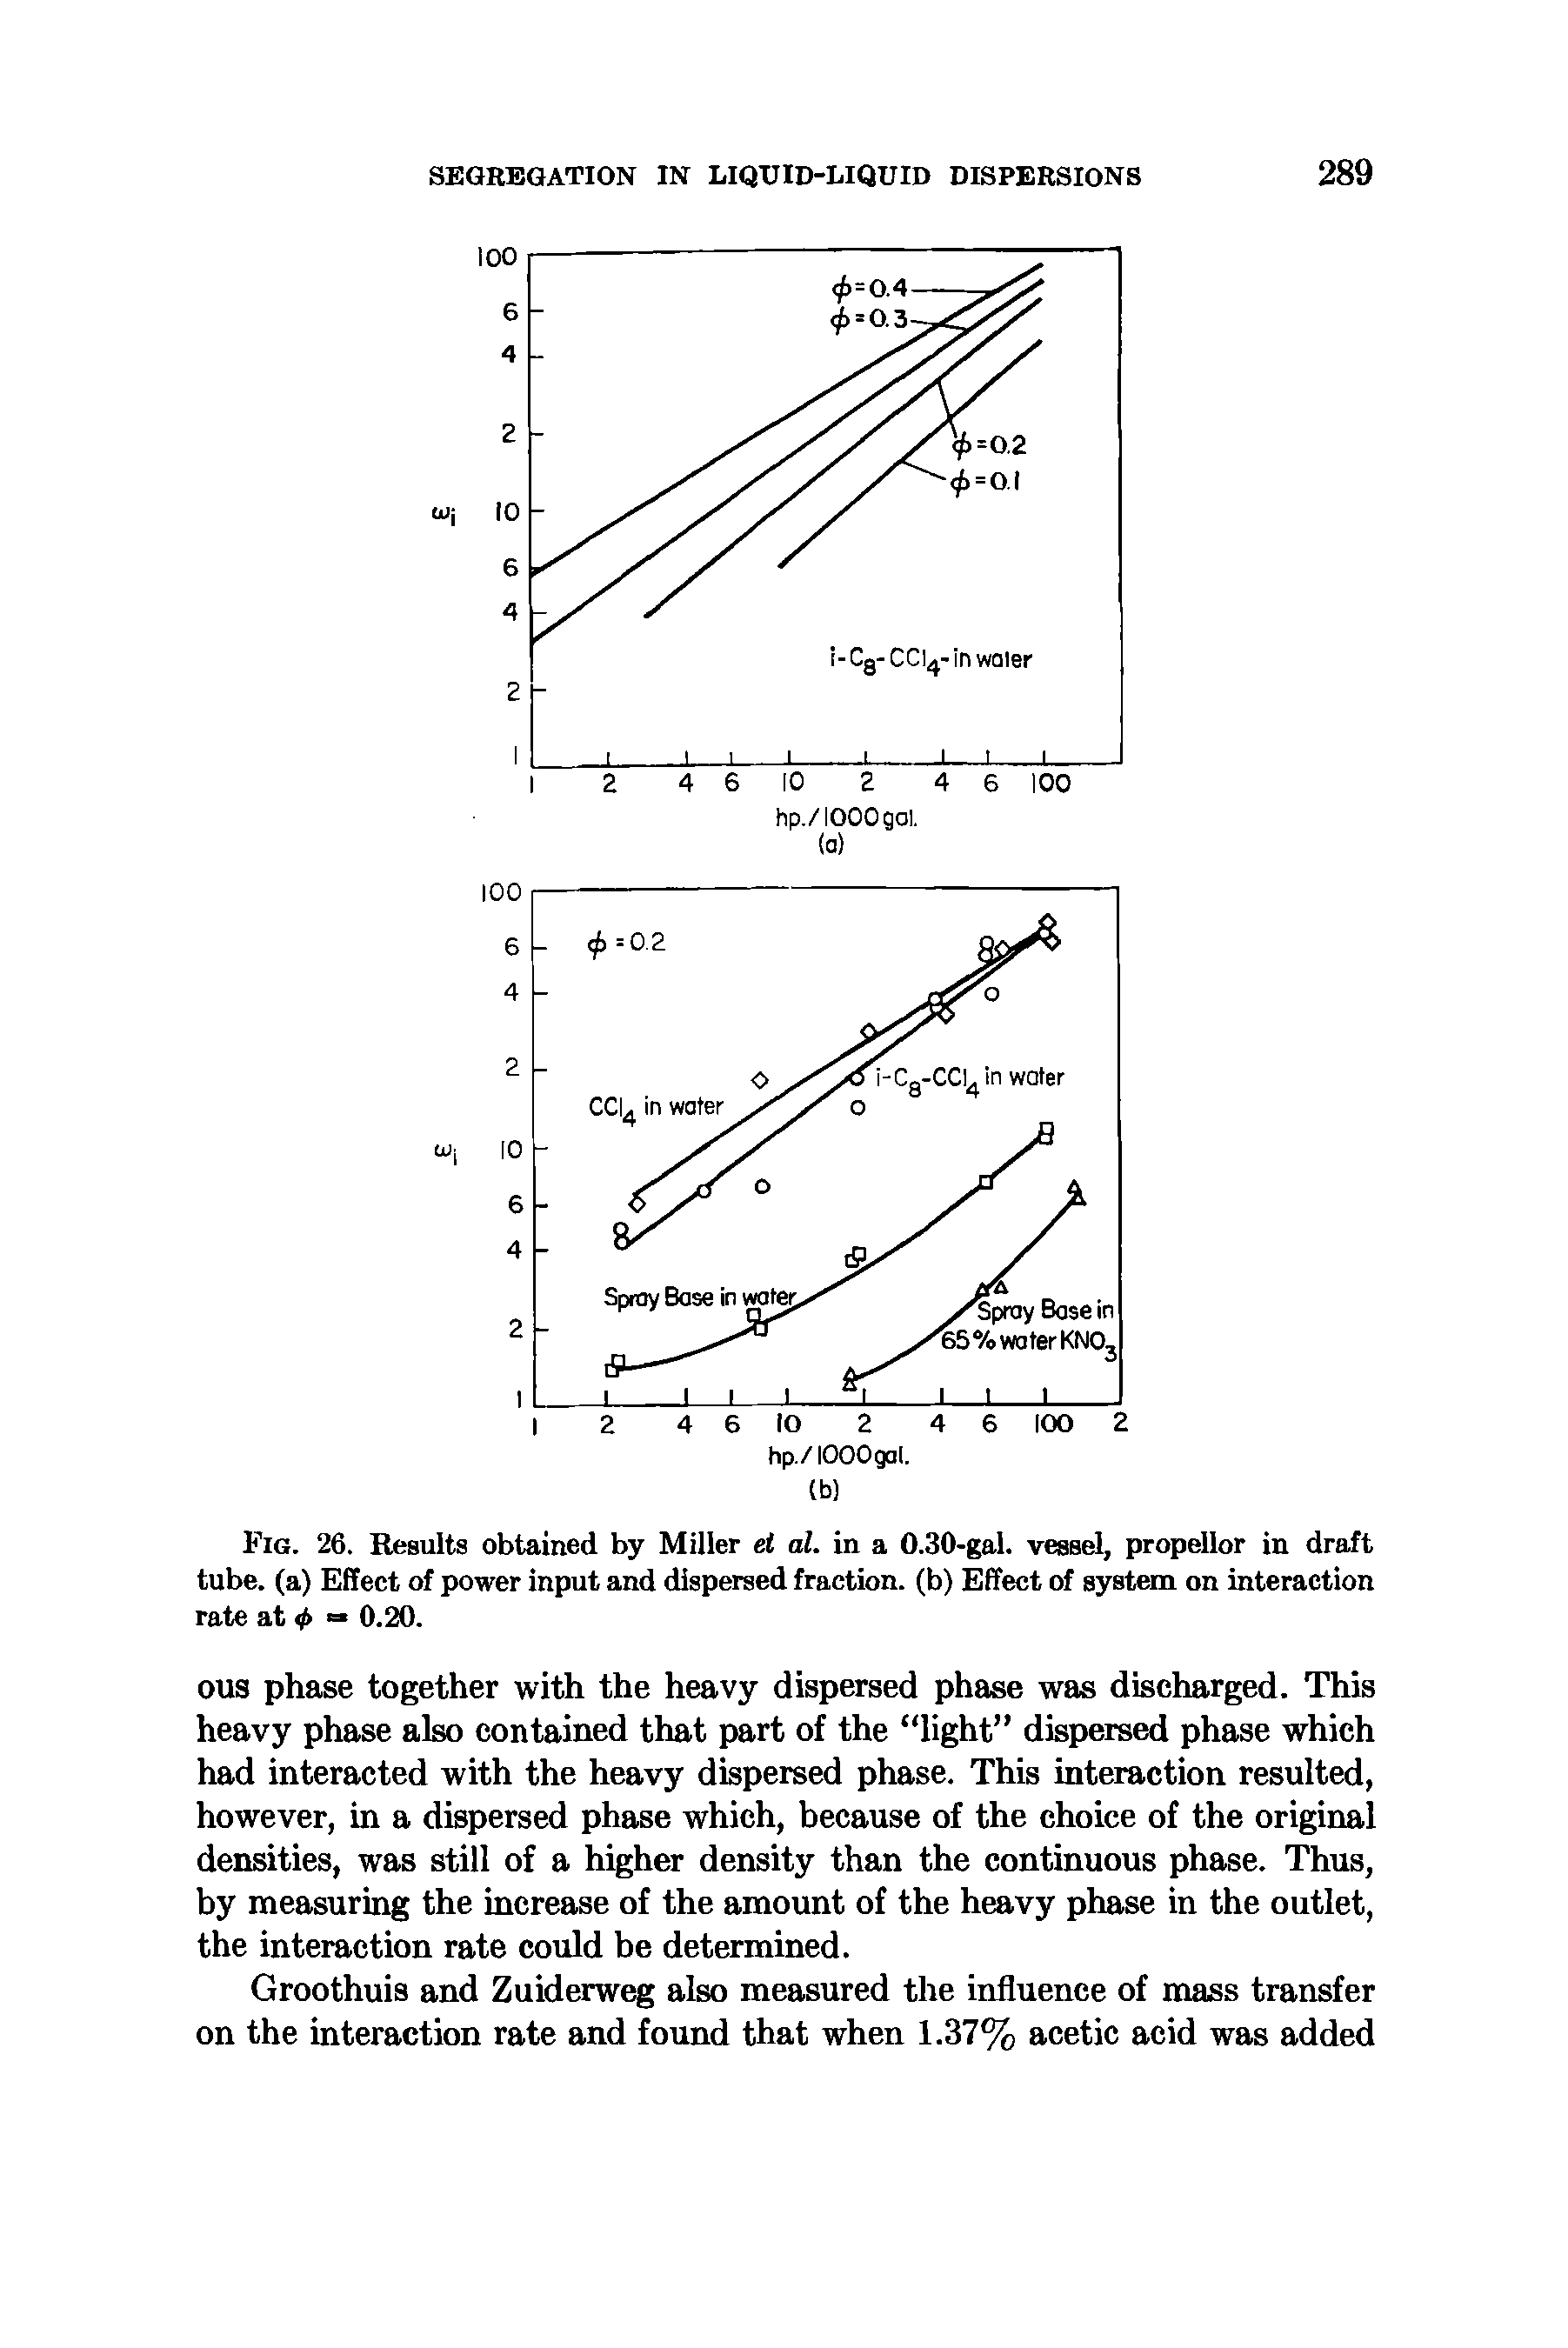 Fig. 26. Results obtained by Miller et al. in a 0.30-gal. vessel, propellor in draft tube, (a) Effect of power input and dispersed fraction, (b) Effect of system on interaction rate at 4> = 0.20.